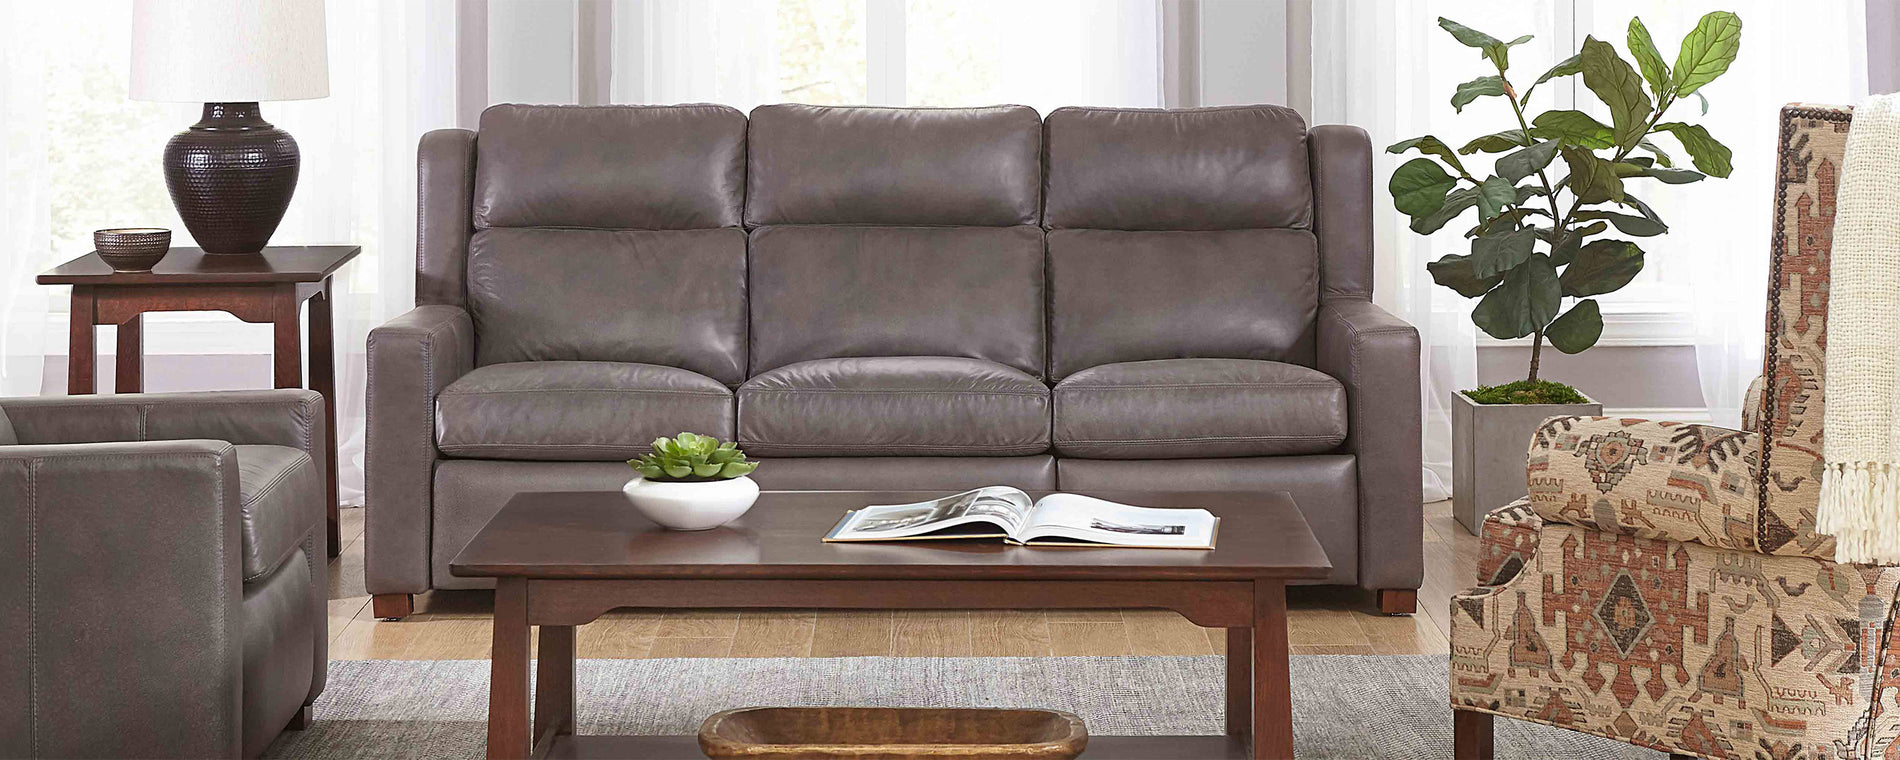 Lifestyle of a gray leather Woodlands Track Arm Sofa sitting against three tall windows, there is a matching Arm Recliner next to it and a dark wood coffee table in front of both